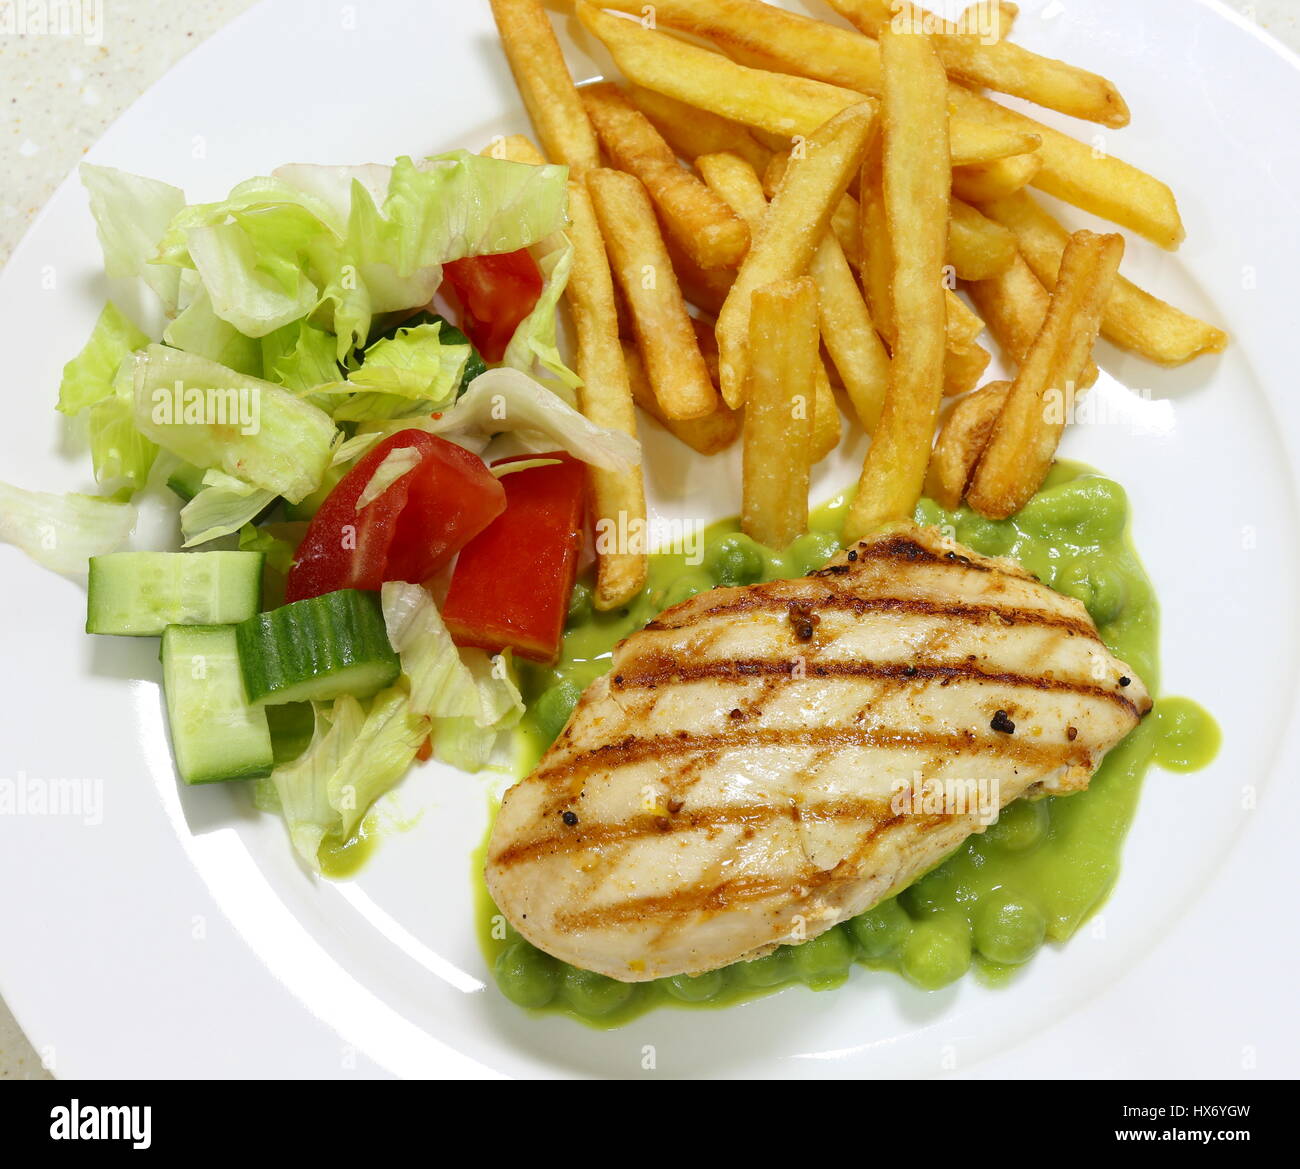 Grilled chicken breast on a bed of green pea puree and peas, served with a salad and french fried potato chips, top view Stock Photo